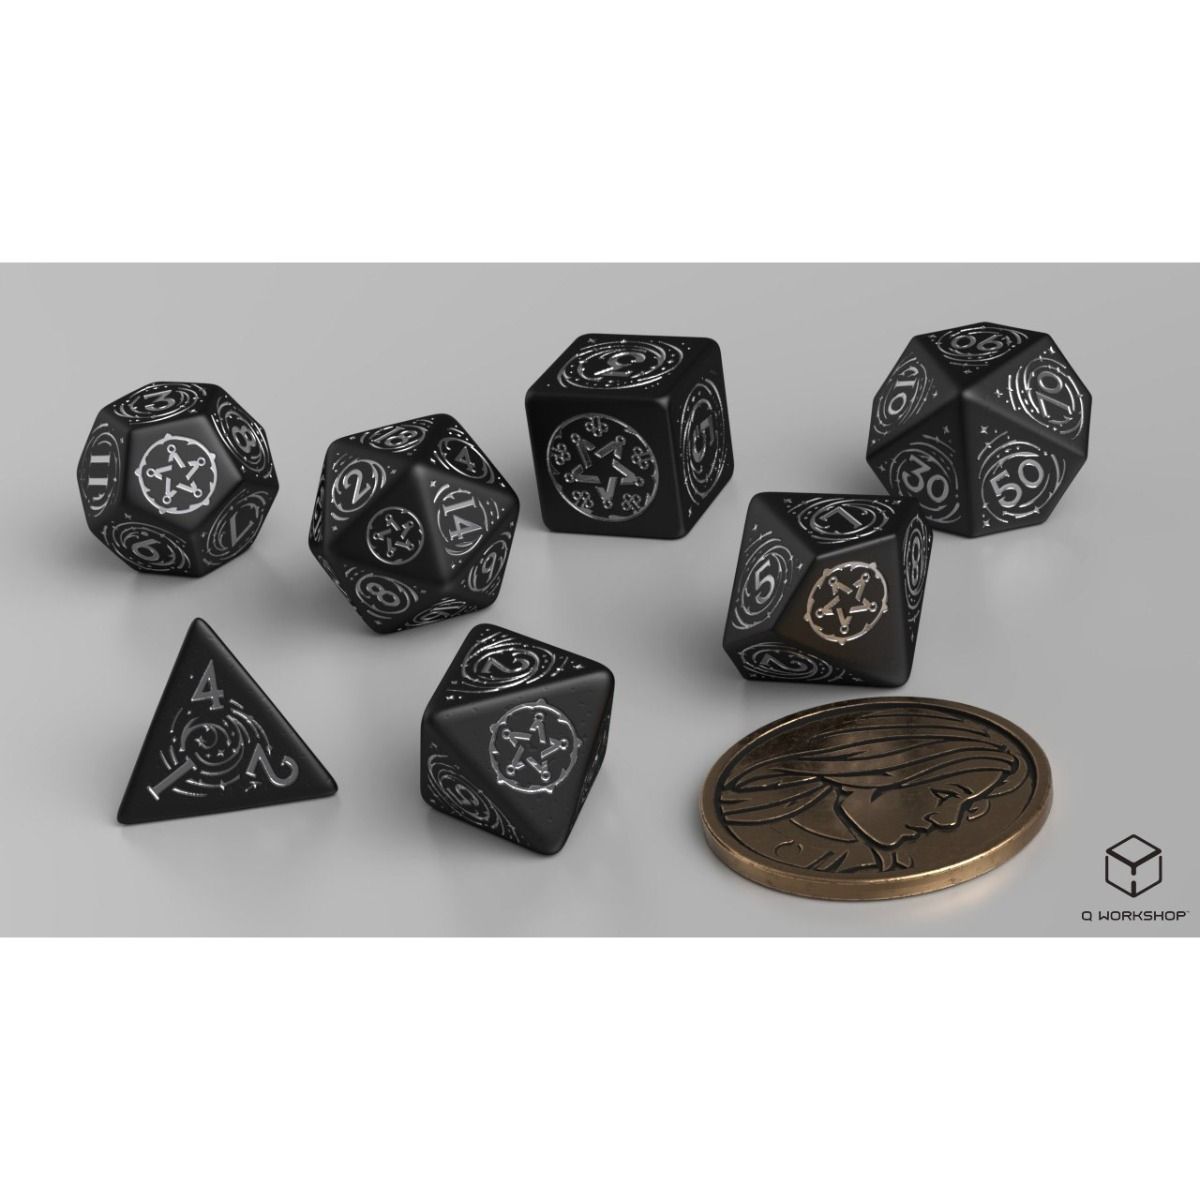 Q Workshop The Witcher Dice Set Yennefer - The Obsidian Star Dice Set 7 With Coin